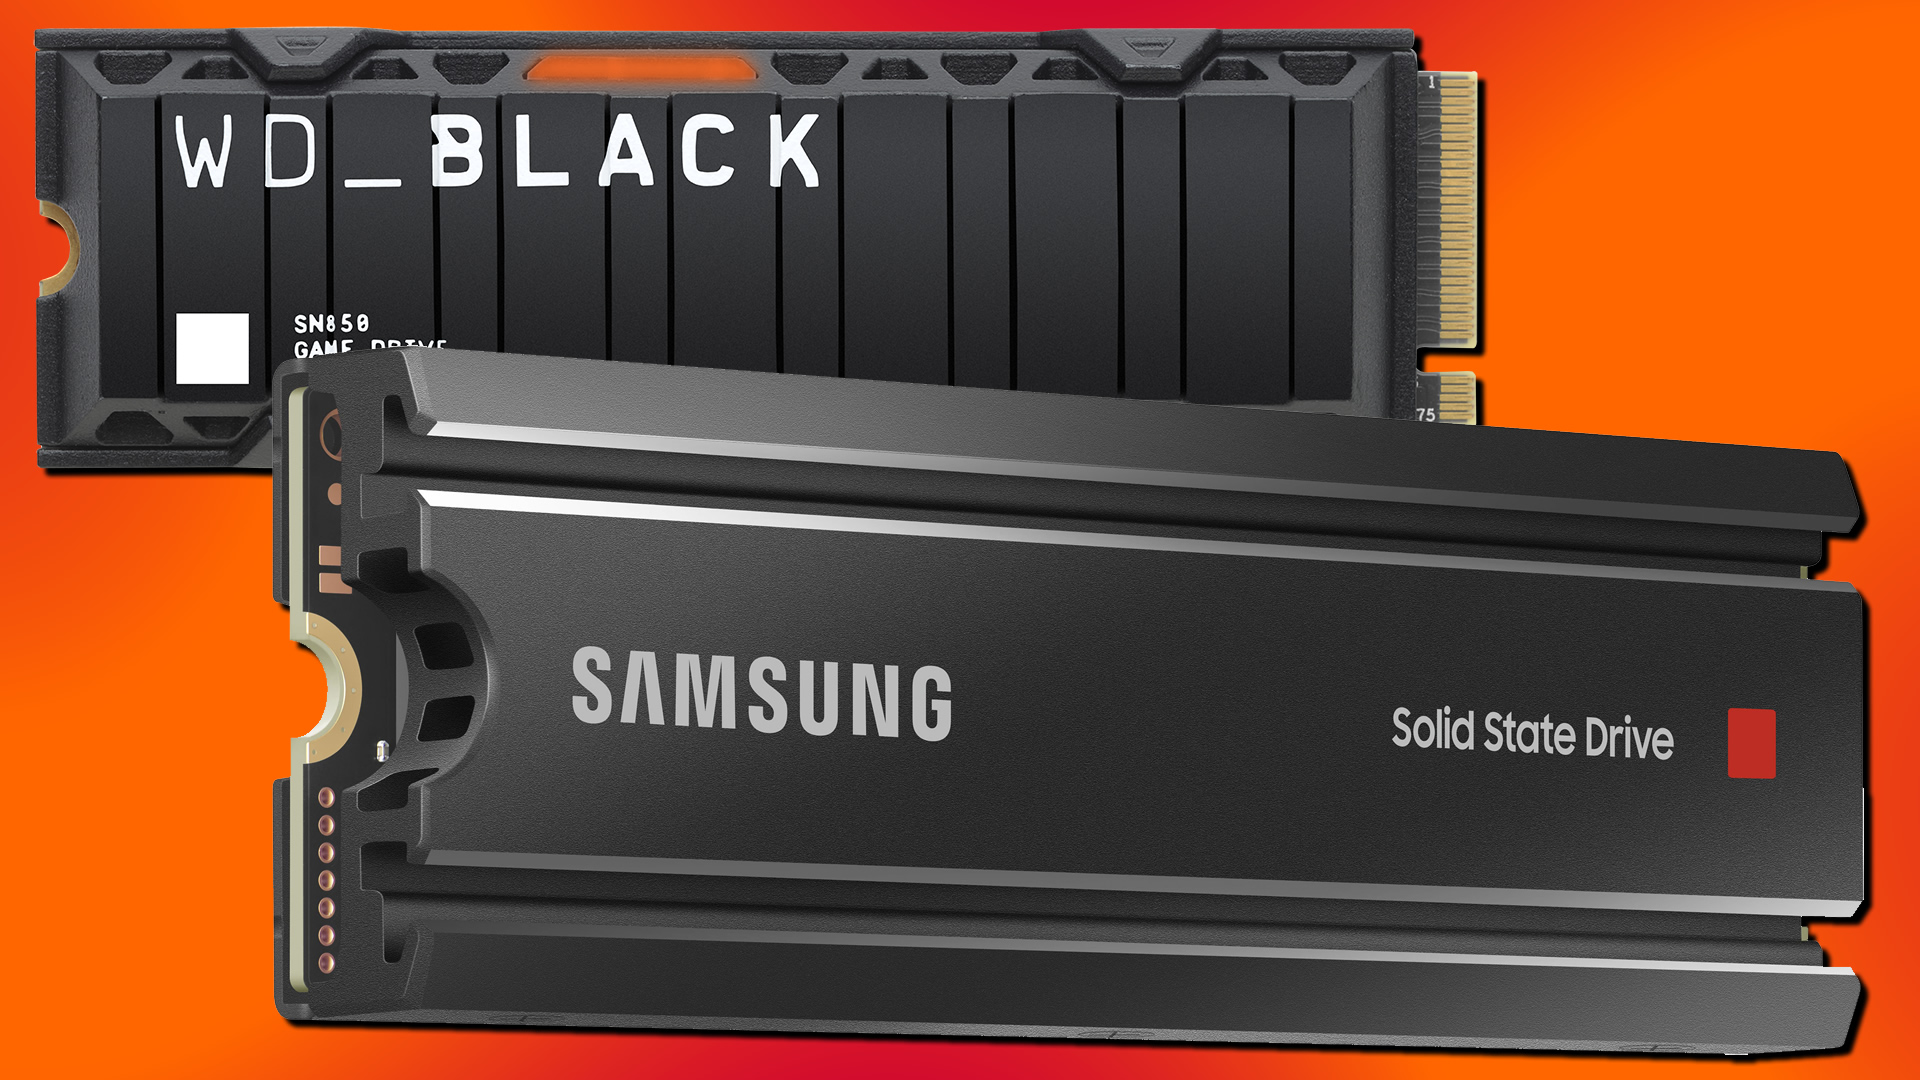 Samsung 980 Pro vs WD Black SN850: Which top PS5 SSD is right for you? |  GamesRadar+